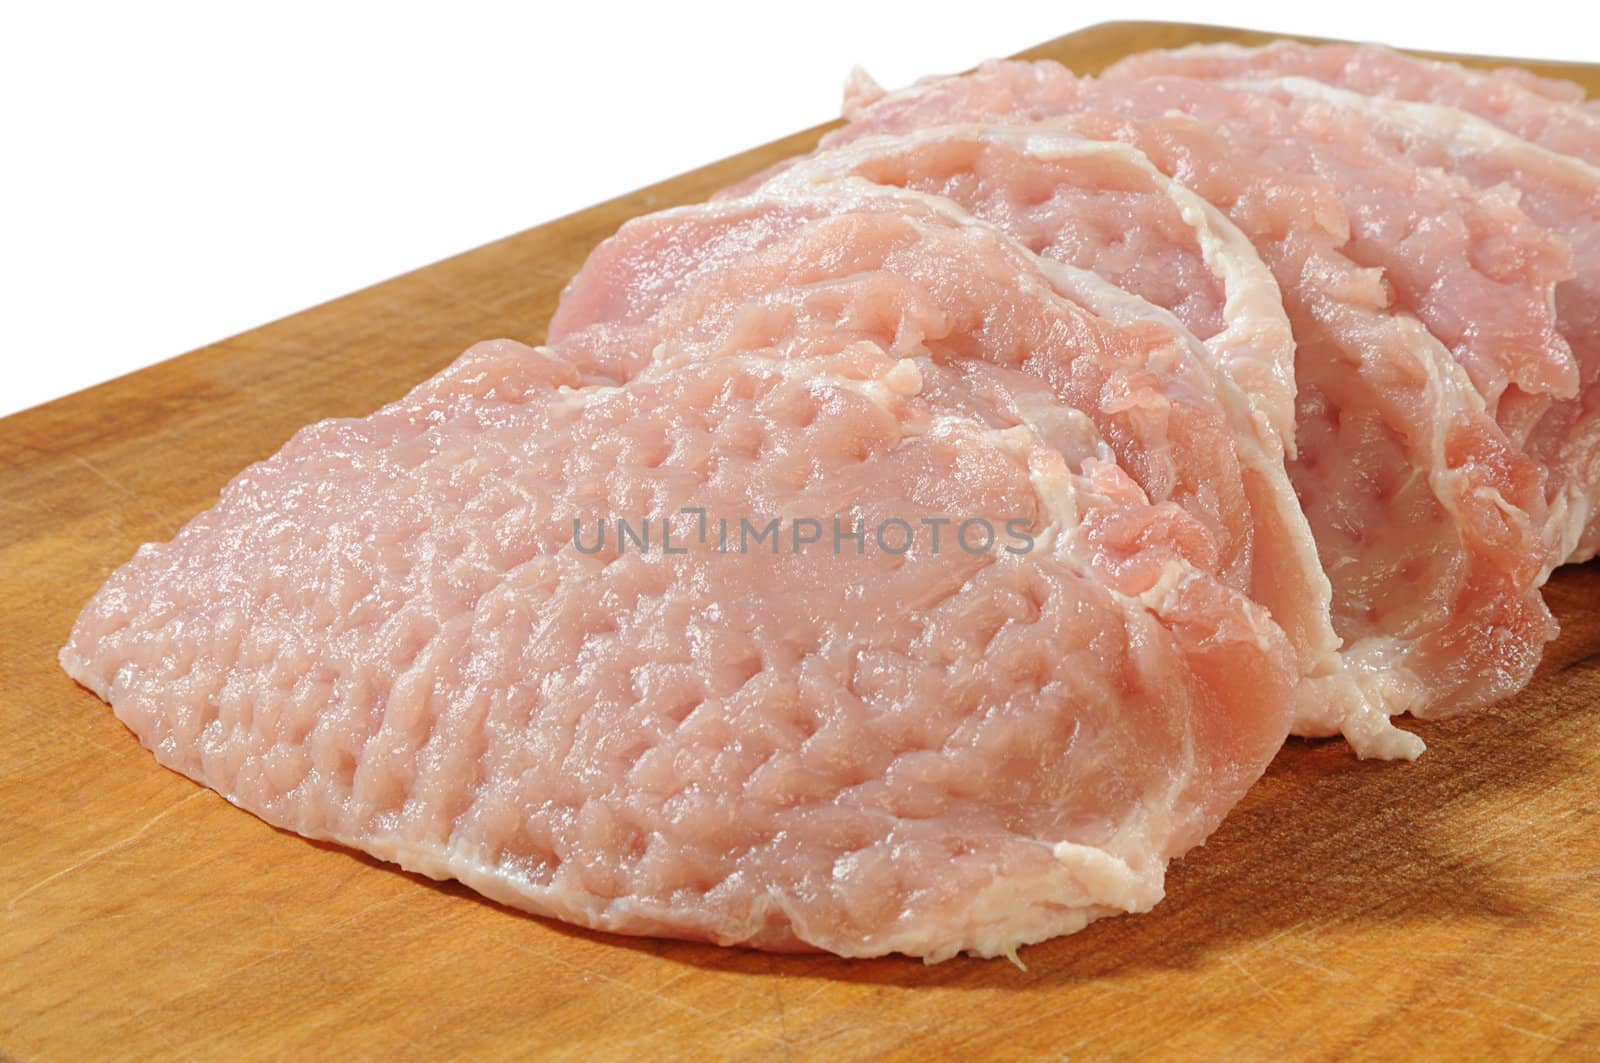 removed and cut raw undercut of pork